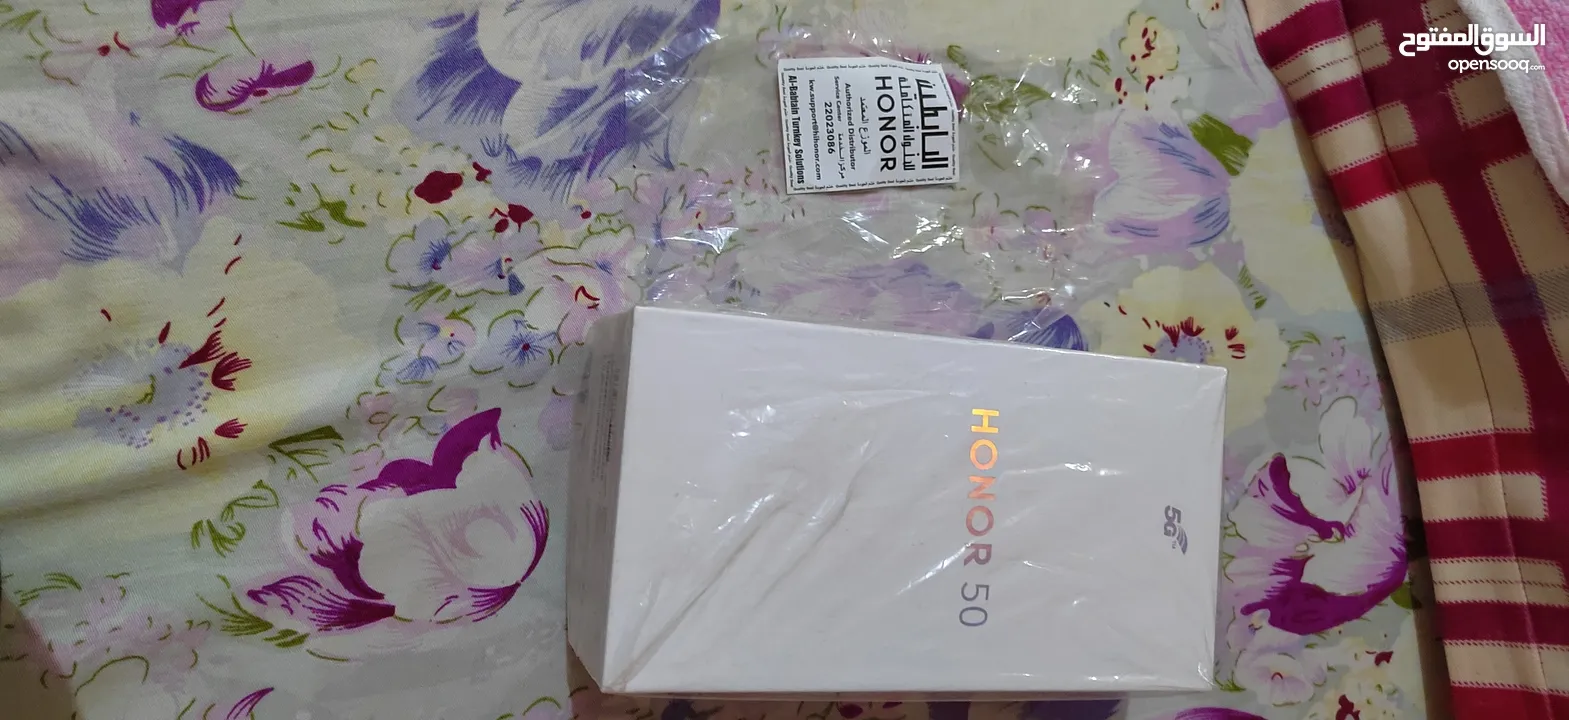 honor 50 good condition